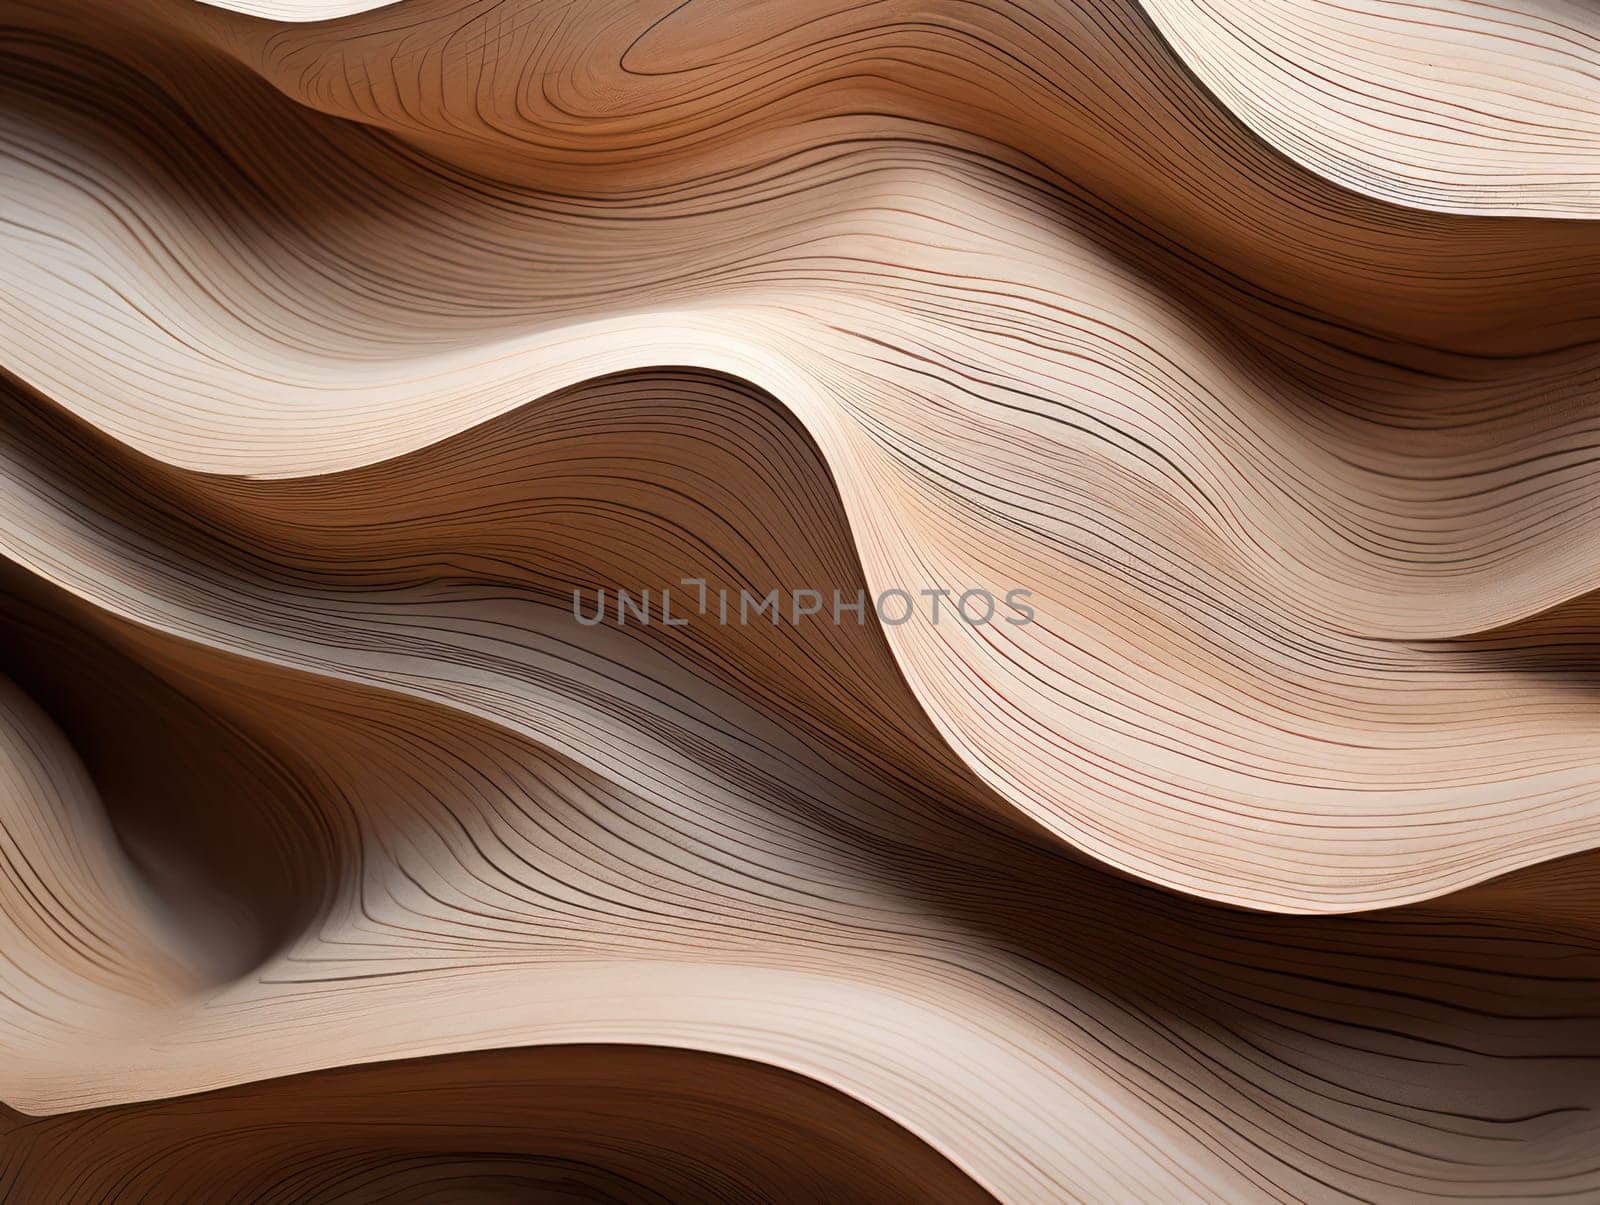 Flowing Waves: Abstract Design on Textured Background